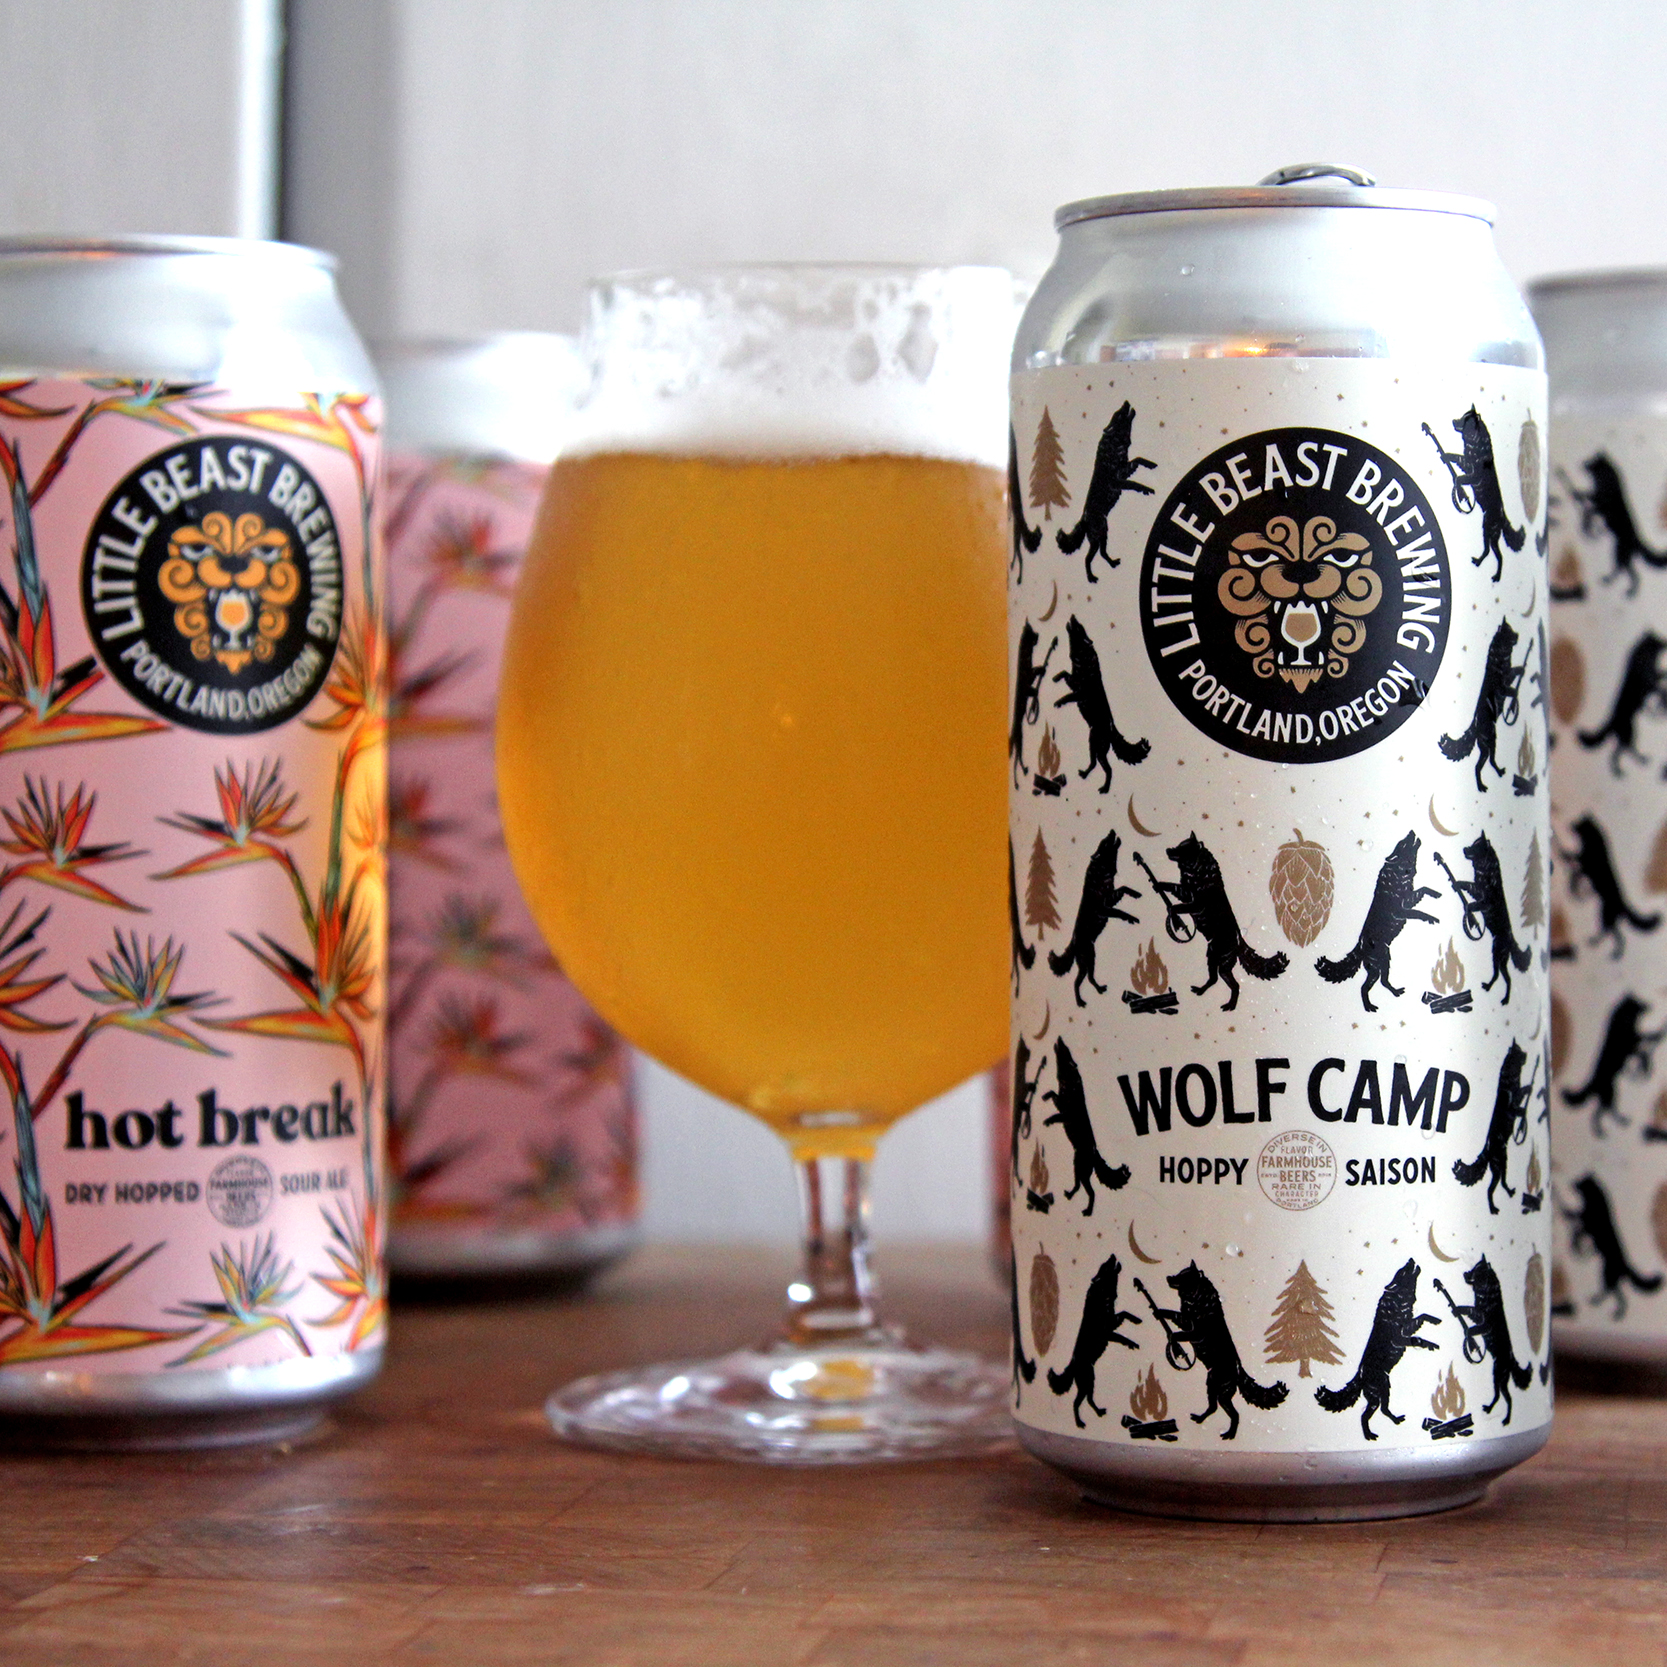 image of Little Beast Brewing Wolf Camp Hoppy Saison + Hot Break Dry-Hopped Sour Ale courtesy of Little Beast Brewing